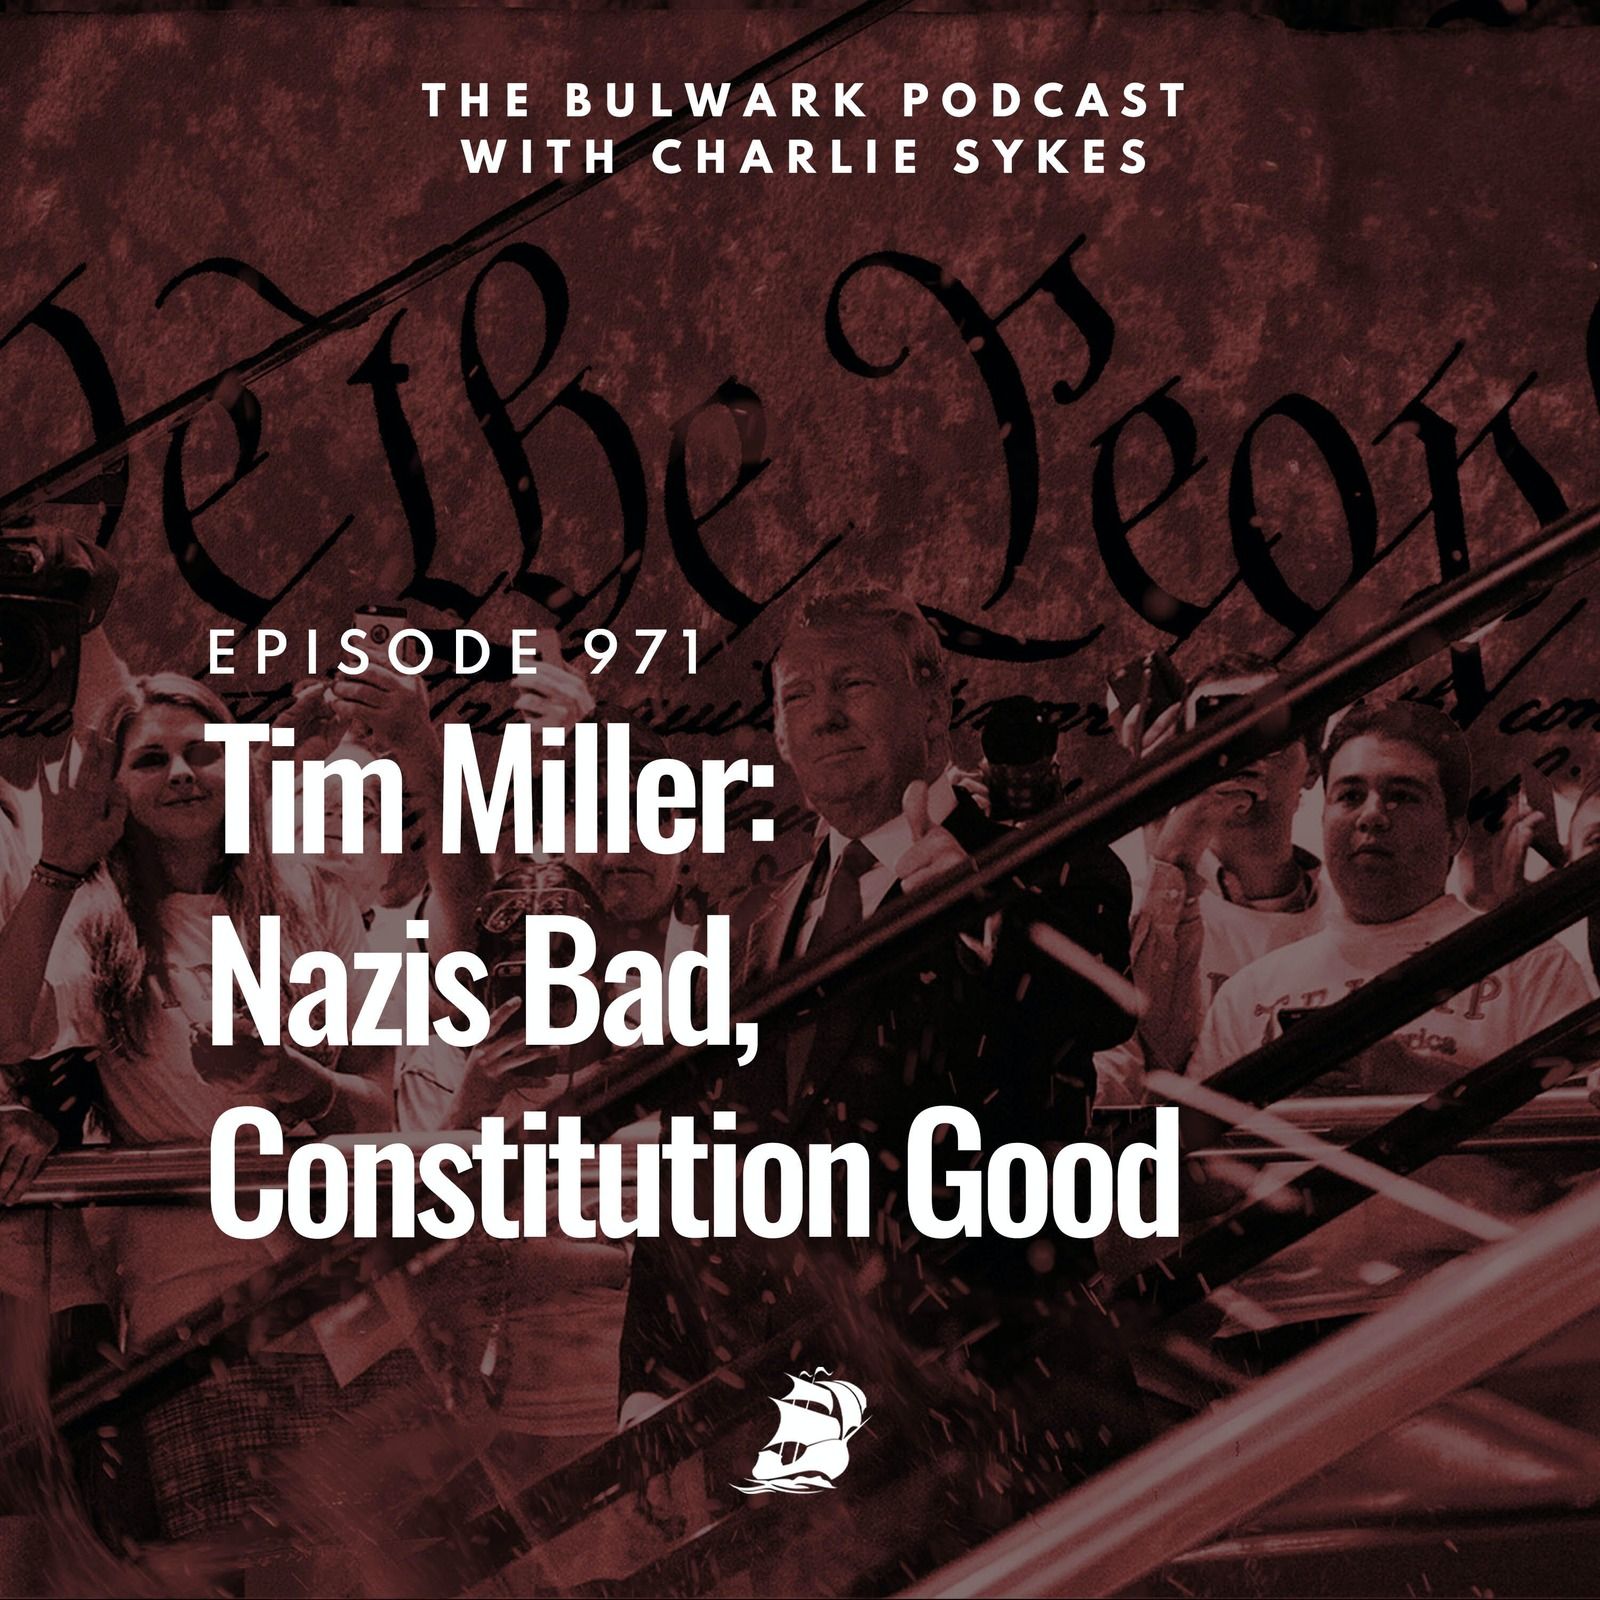 Tim Miller: Nazis Bad, Constitution Good by The Bulwark Podcast